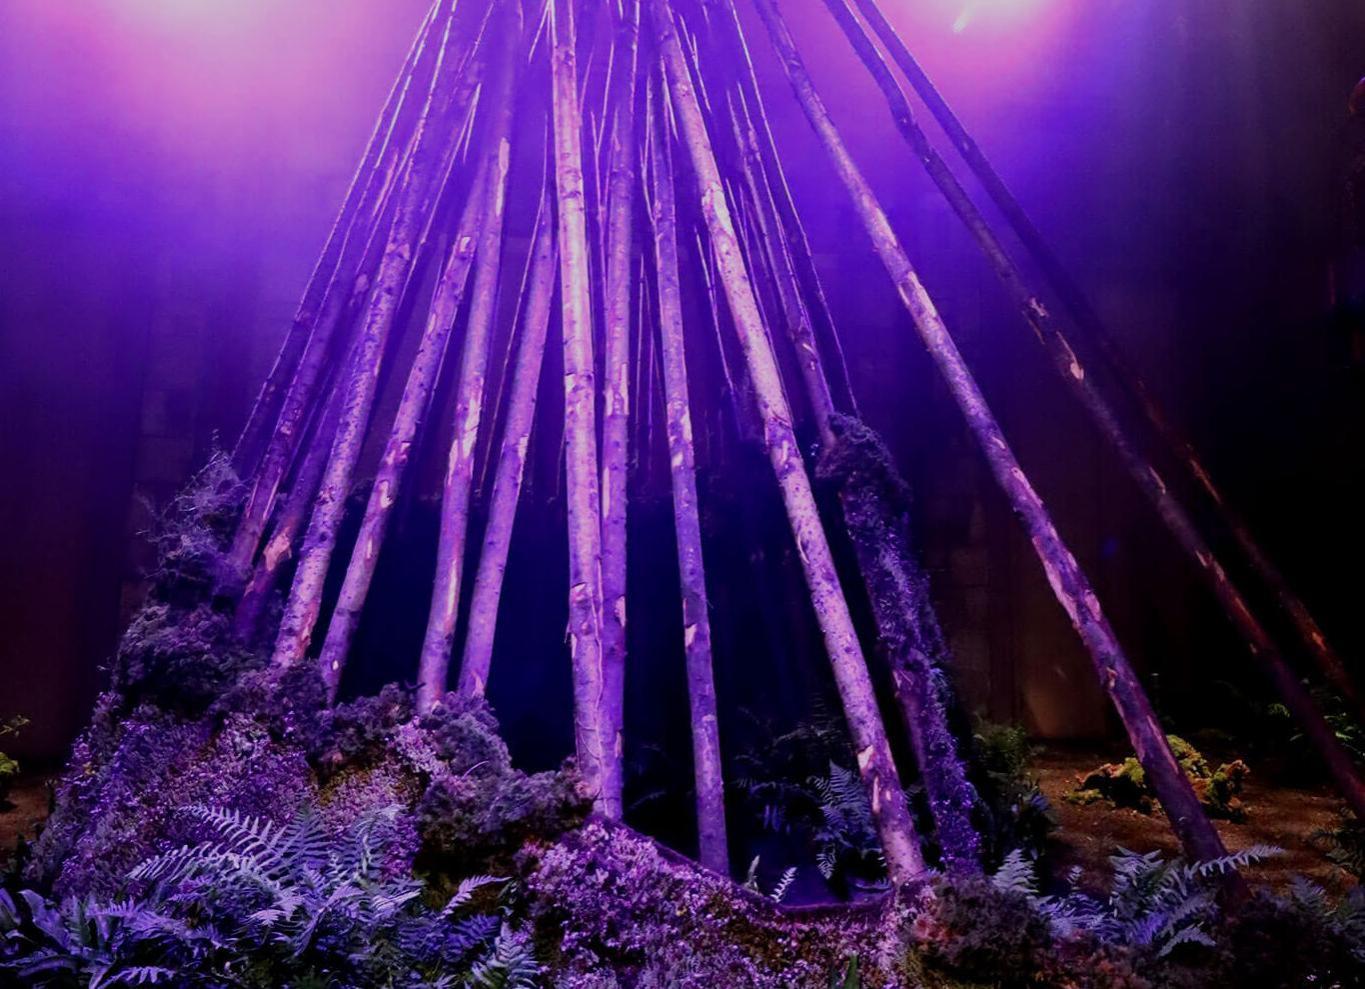 A tipi structure made from tree branches, surrounded by ferns, in a mysterious purple light